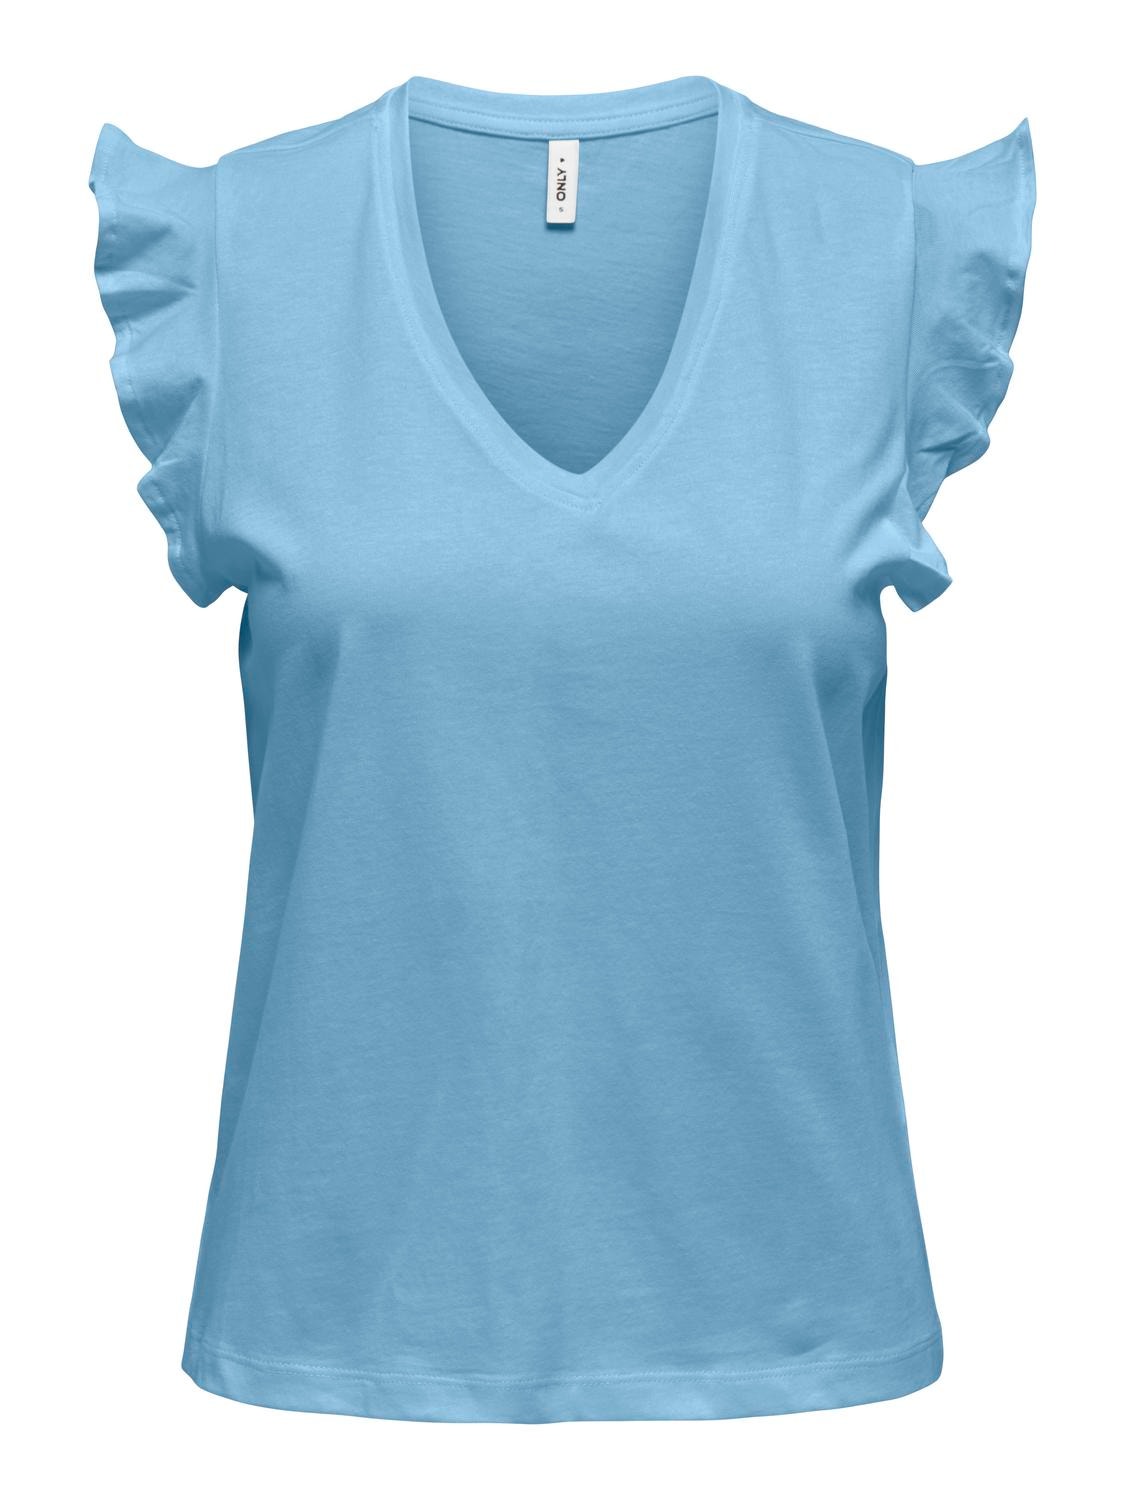 ONLY V-neck Ruffle Top -Clear Sky - 15252469